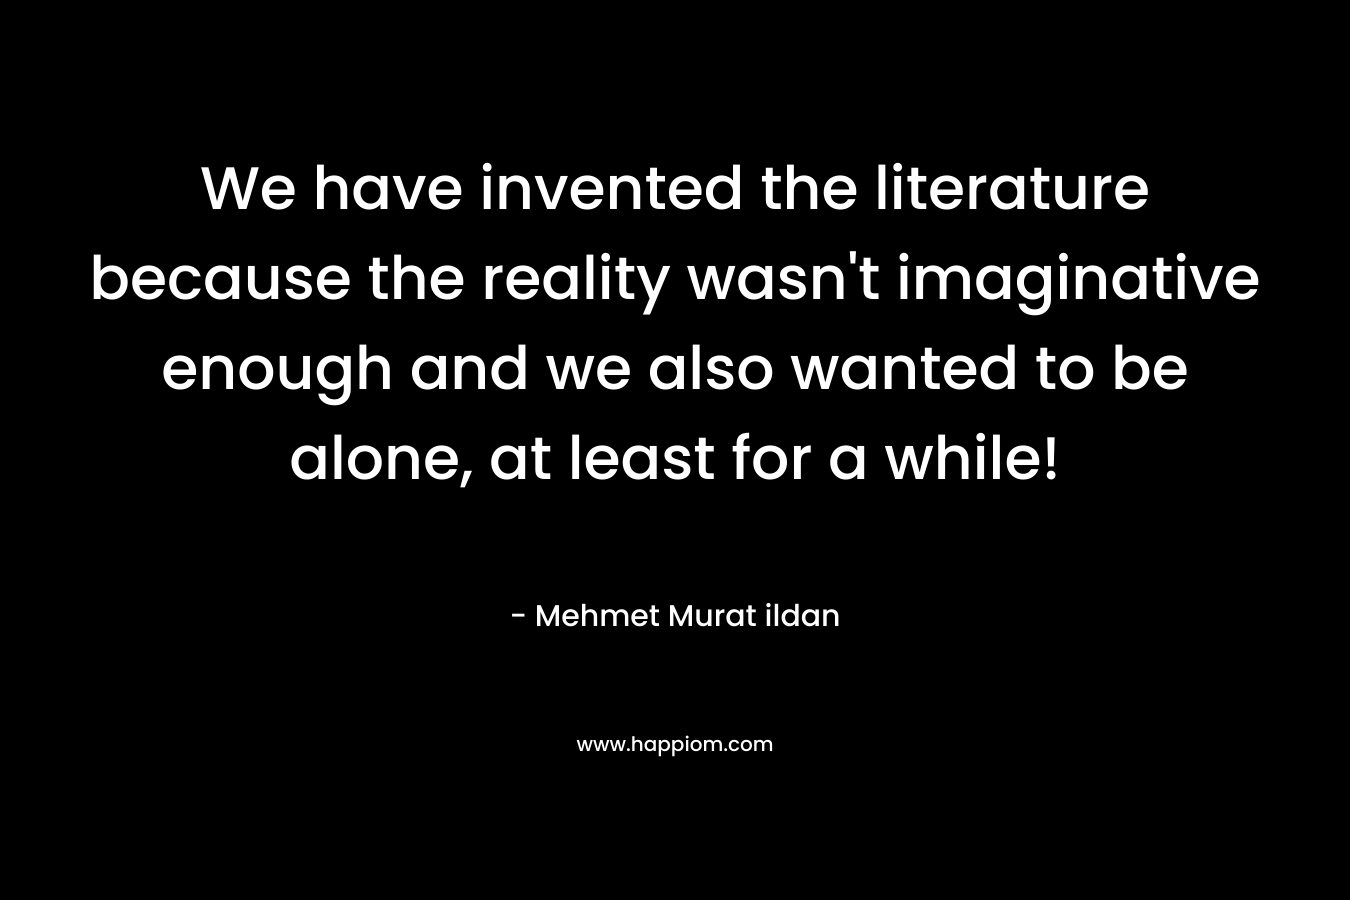 We have invented the literature because the reality wasn’t imaginative enough and we also wanted to be alone, at least for a while! – Mehmet Murat ildan